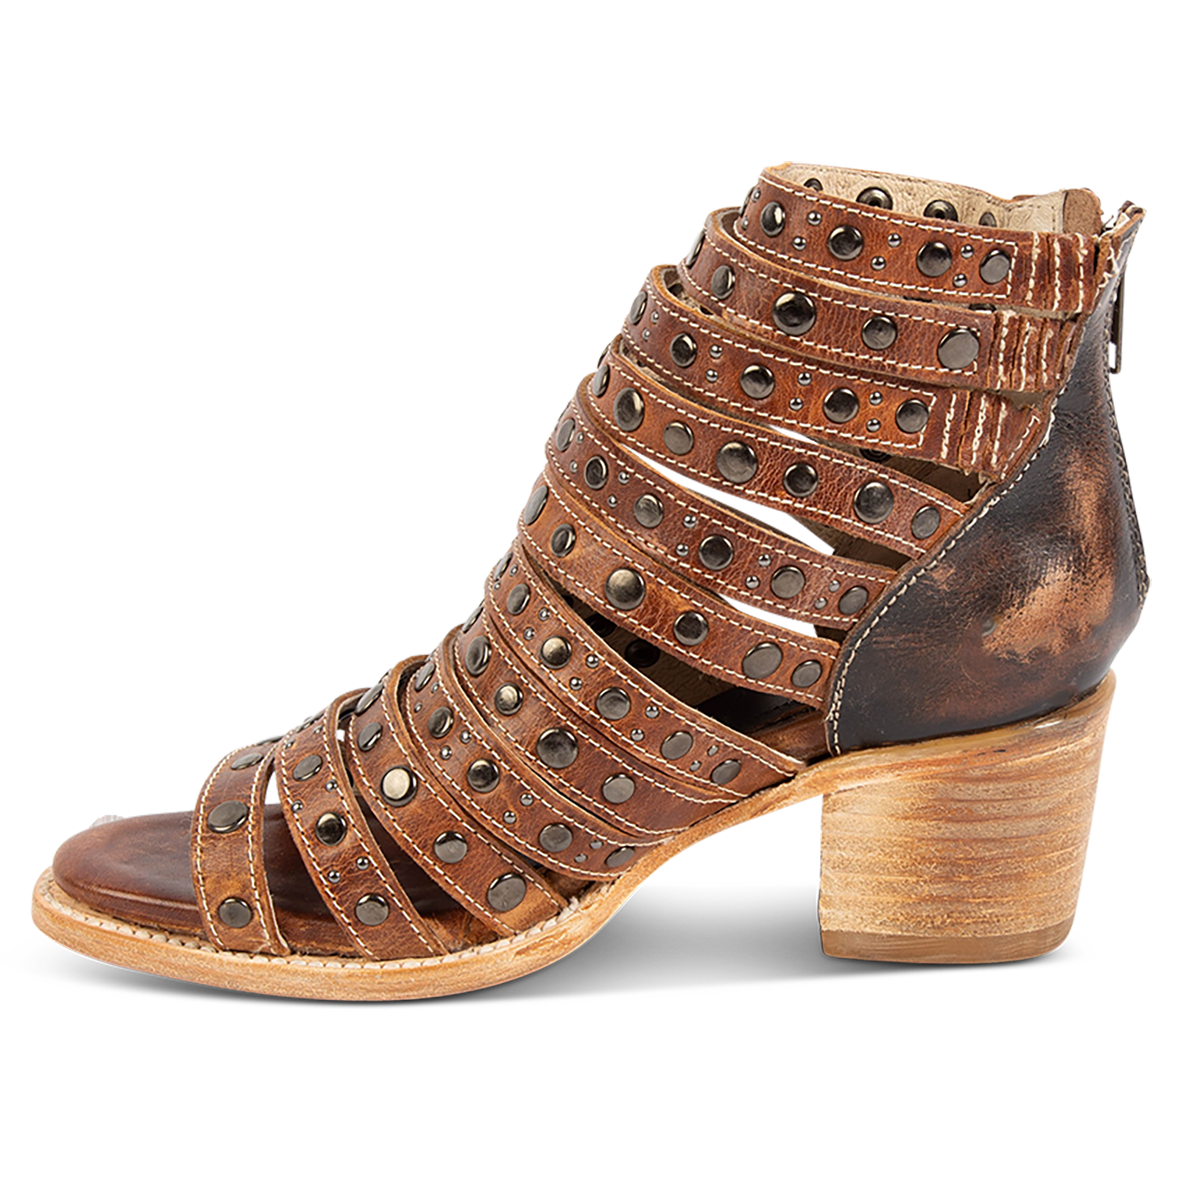 Inside view showing a stacked heel and embellished leather straps on FREEBIRD women's Cannes cognac leather sandal